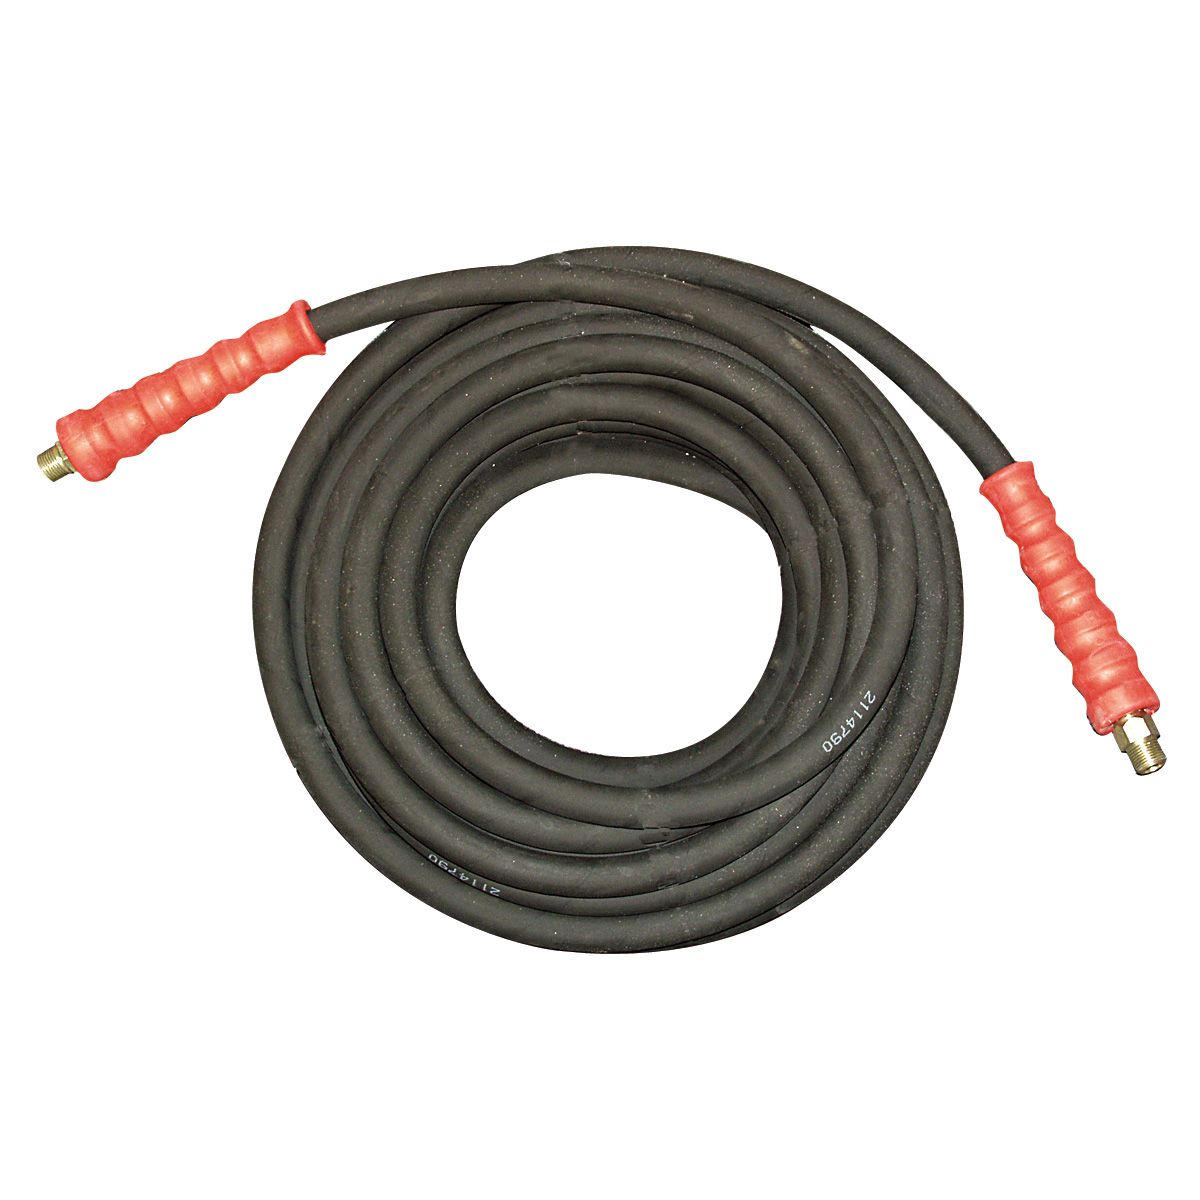 4000 PSI BLACK Wire Braid FREE SHIPPING 4-Pressure Washer Hose 50' w/ Couplers 